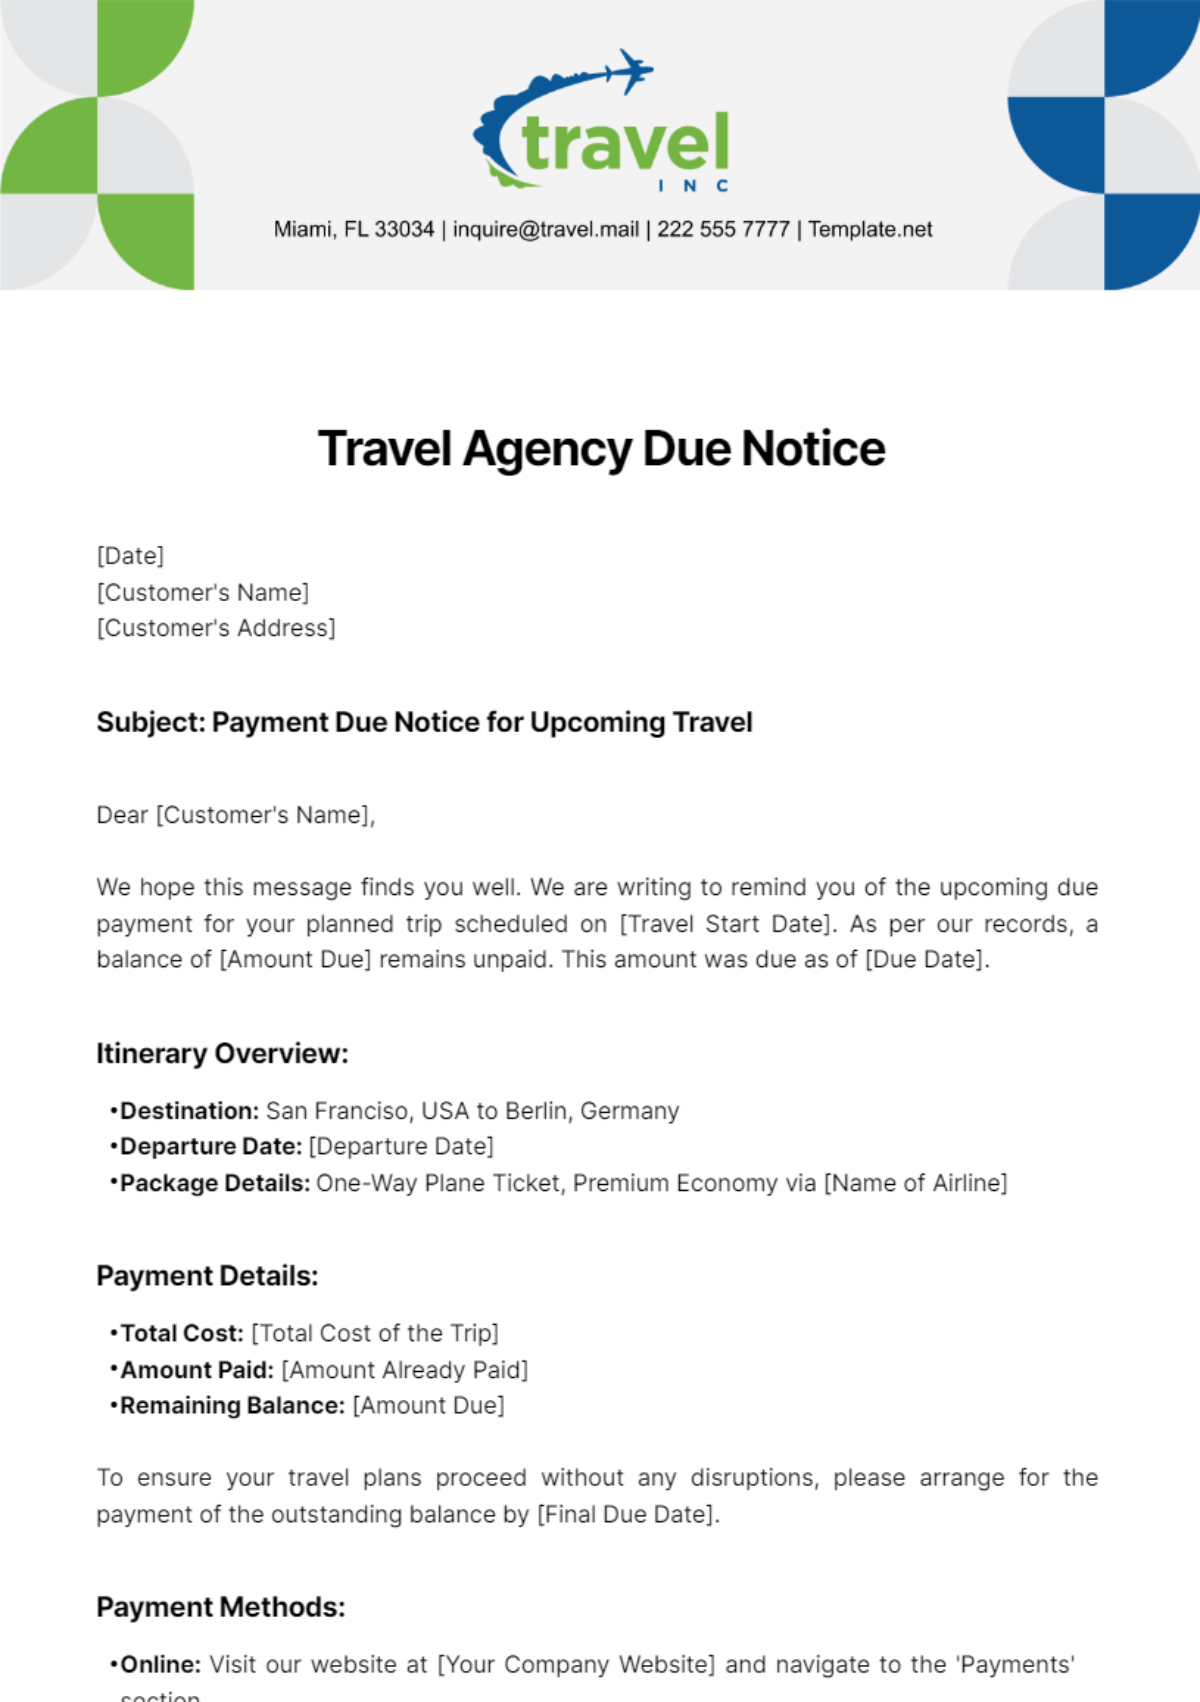 Travel Agency Due Notice Template